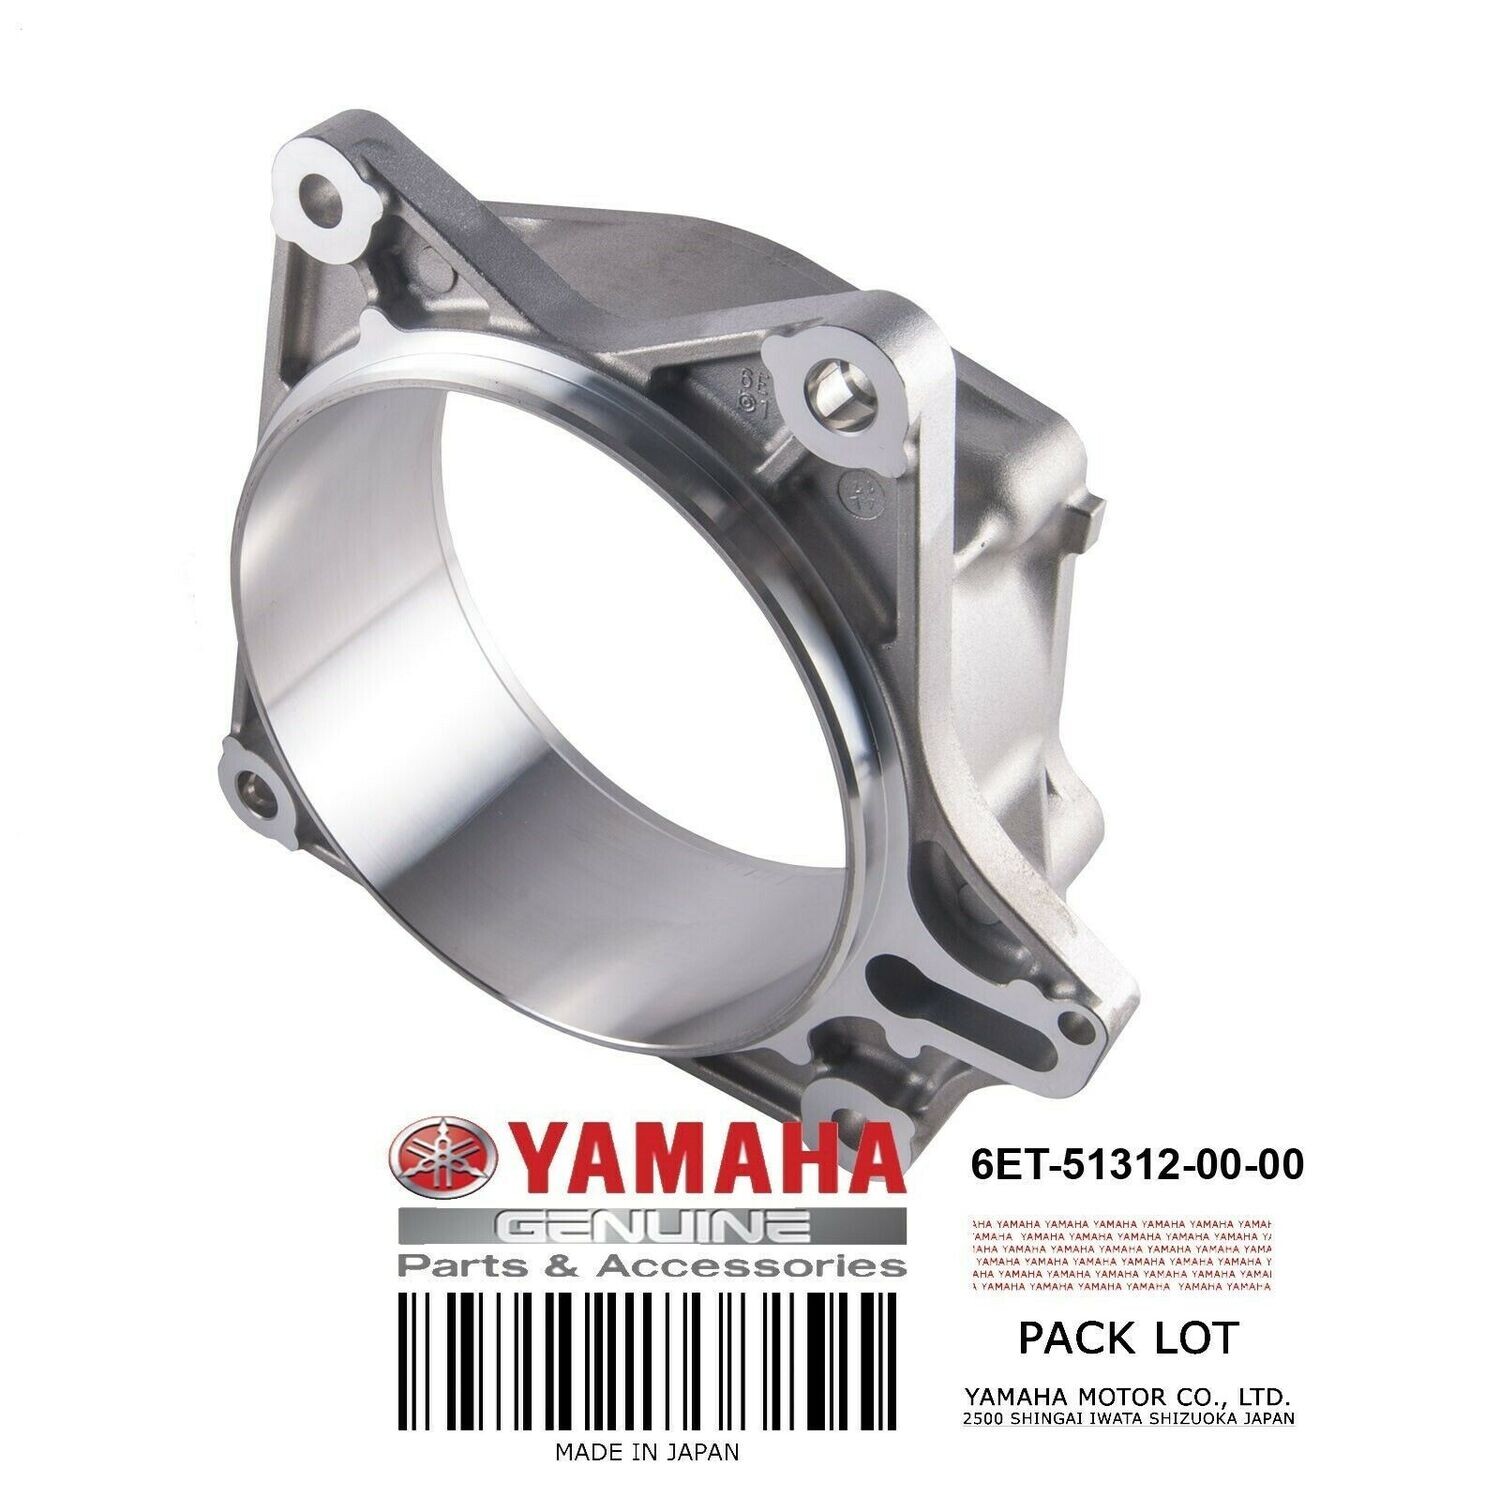 Yamaha housing with Stainless wear ring 6ET-51312-10-00  99999-04523-00 160mm 2014-2018 svho